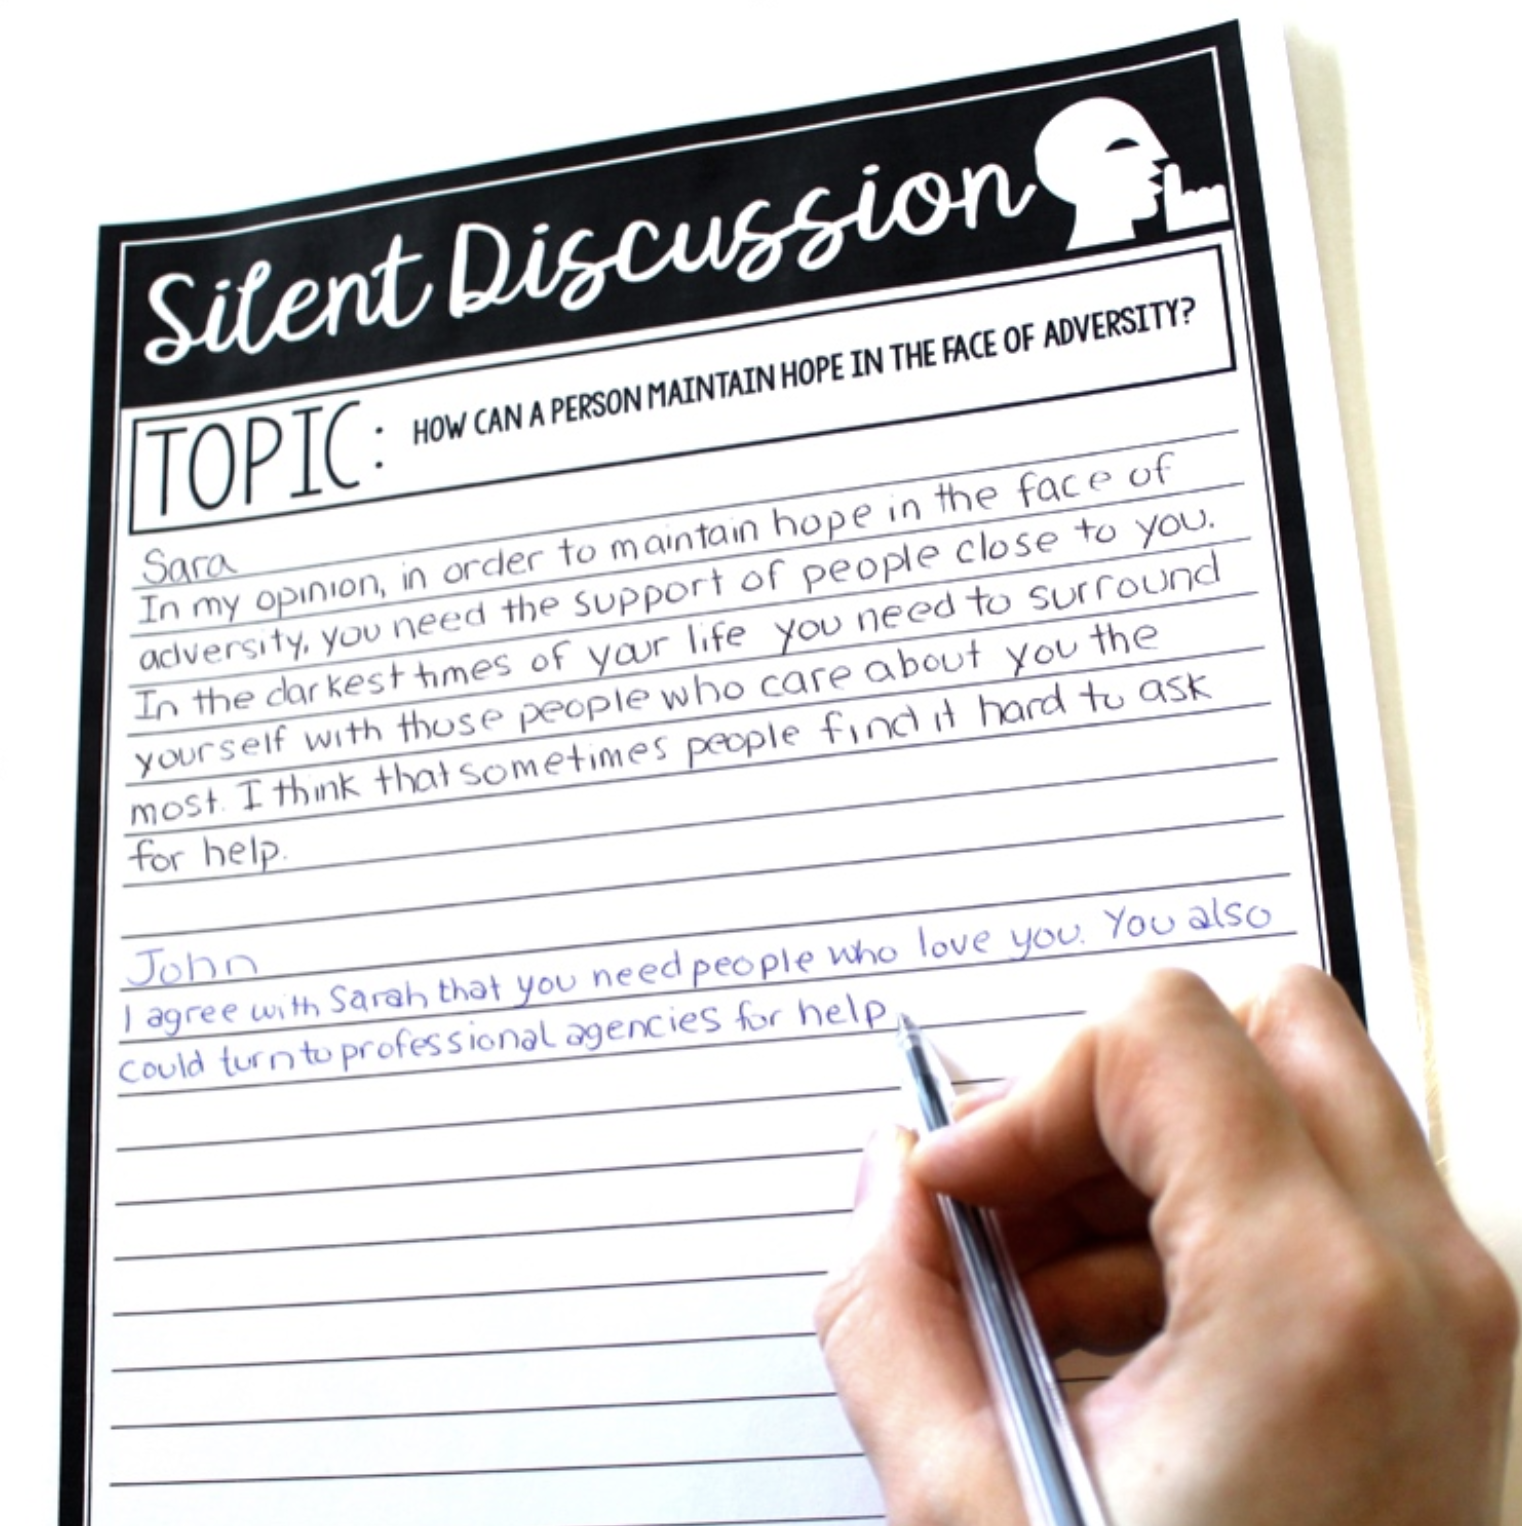 Silent Discussions Worksheet to Improve Discussion When No One Wants to Talk